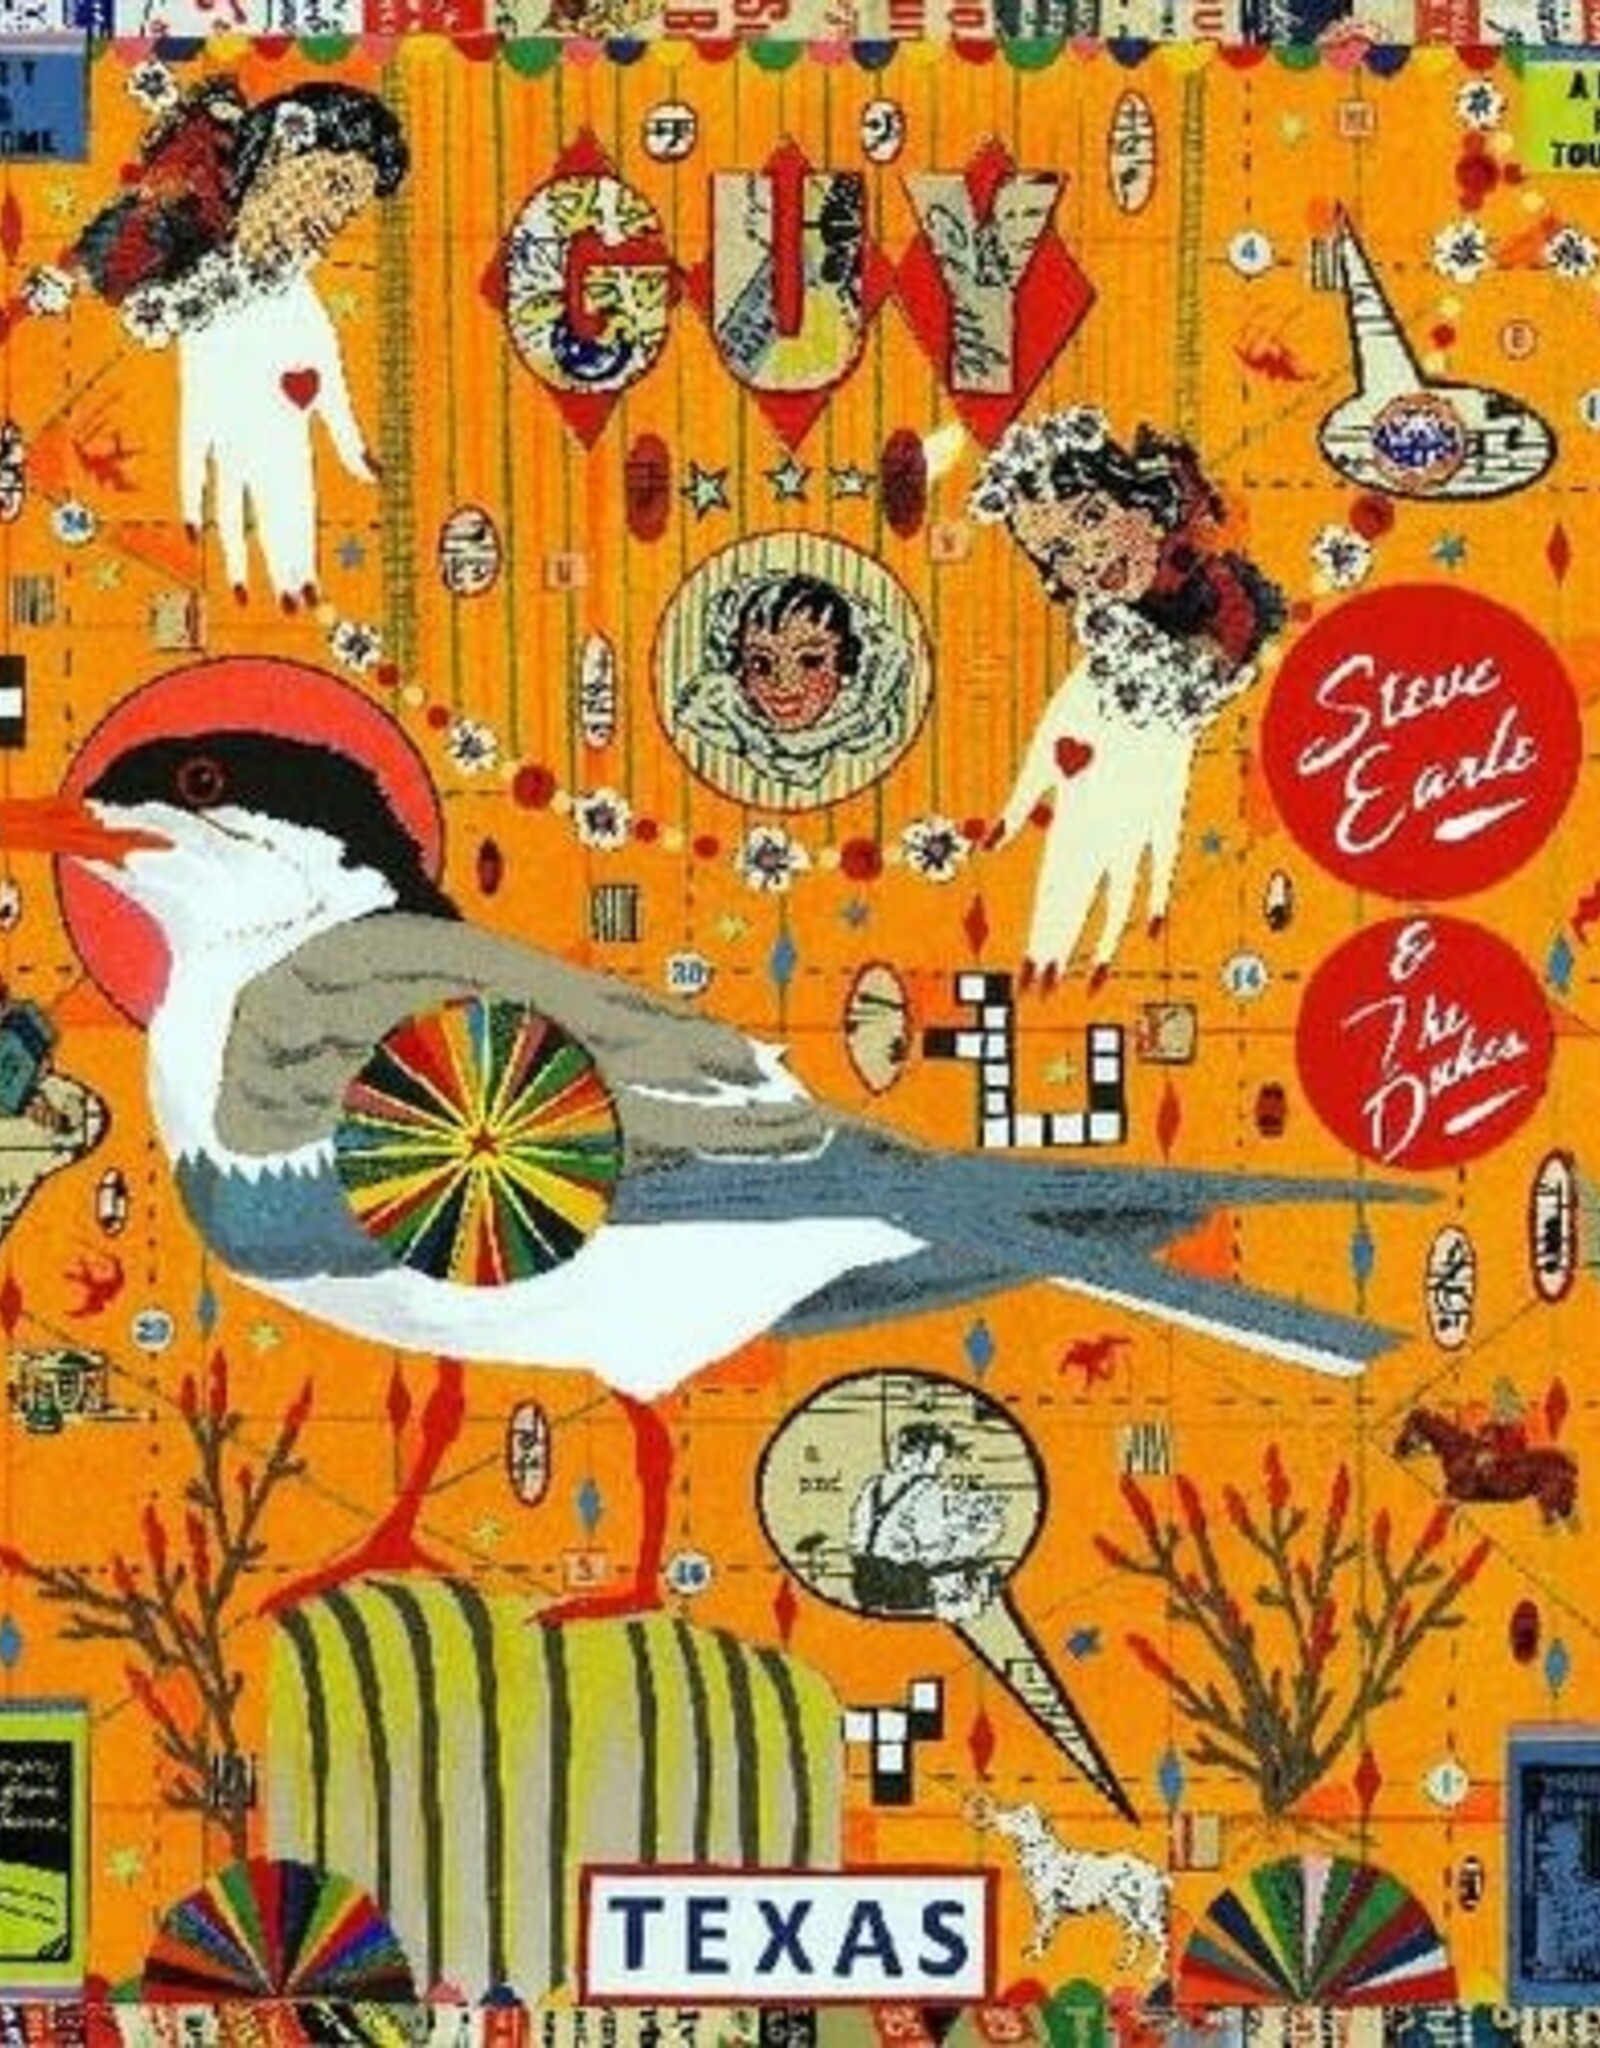 Steve Earle And The Dukes	GUY (2LP, Orange and Red Swirl Color Vinyl)